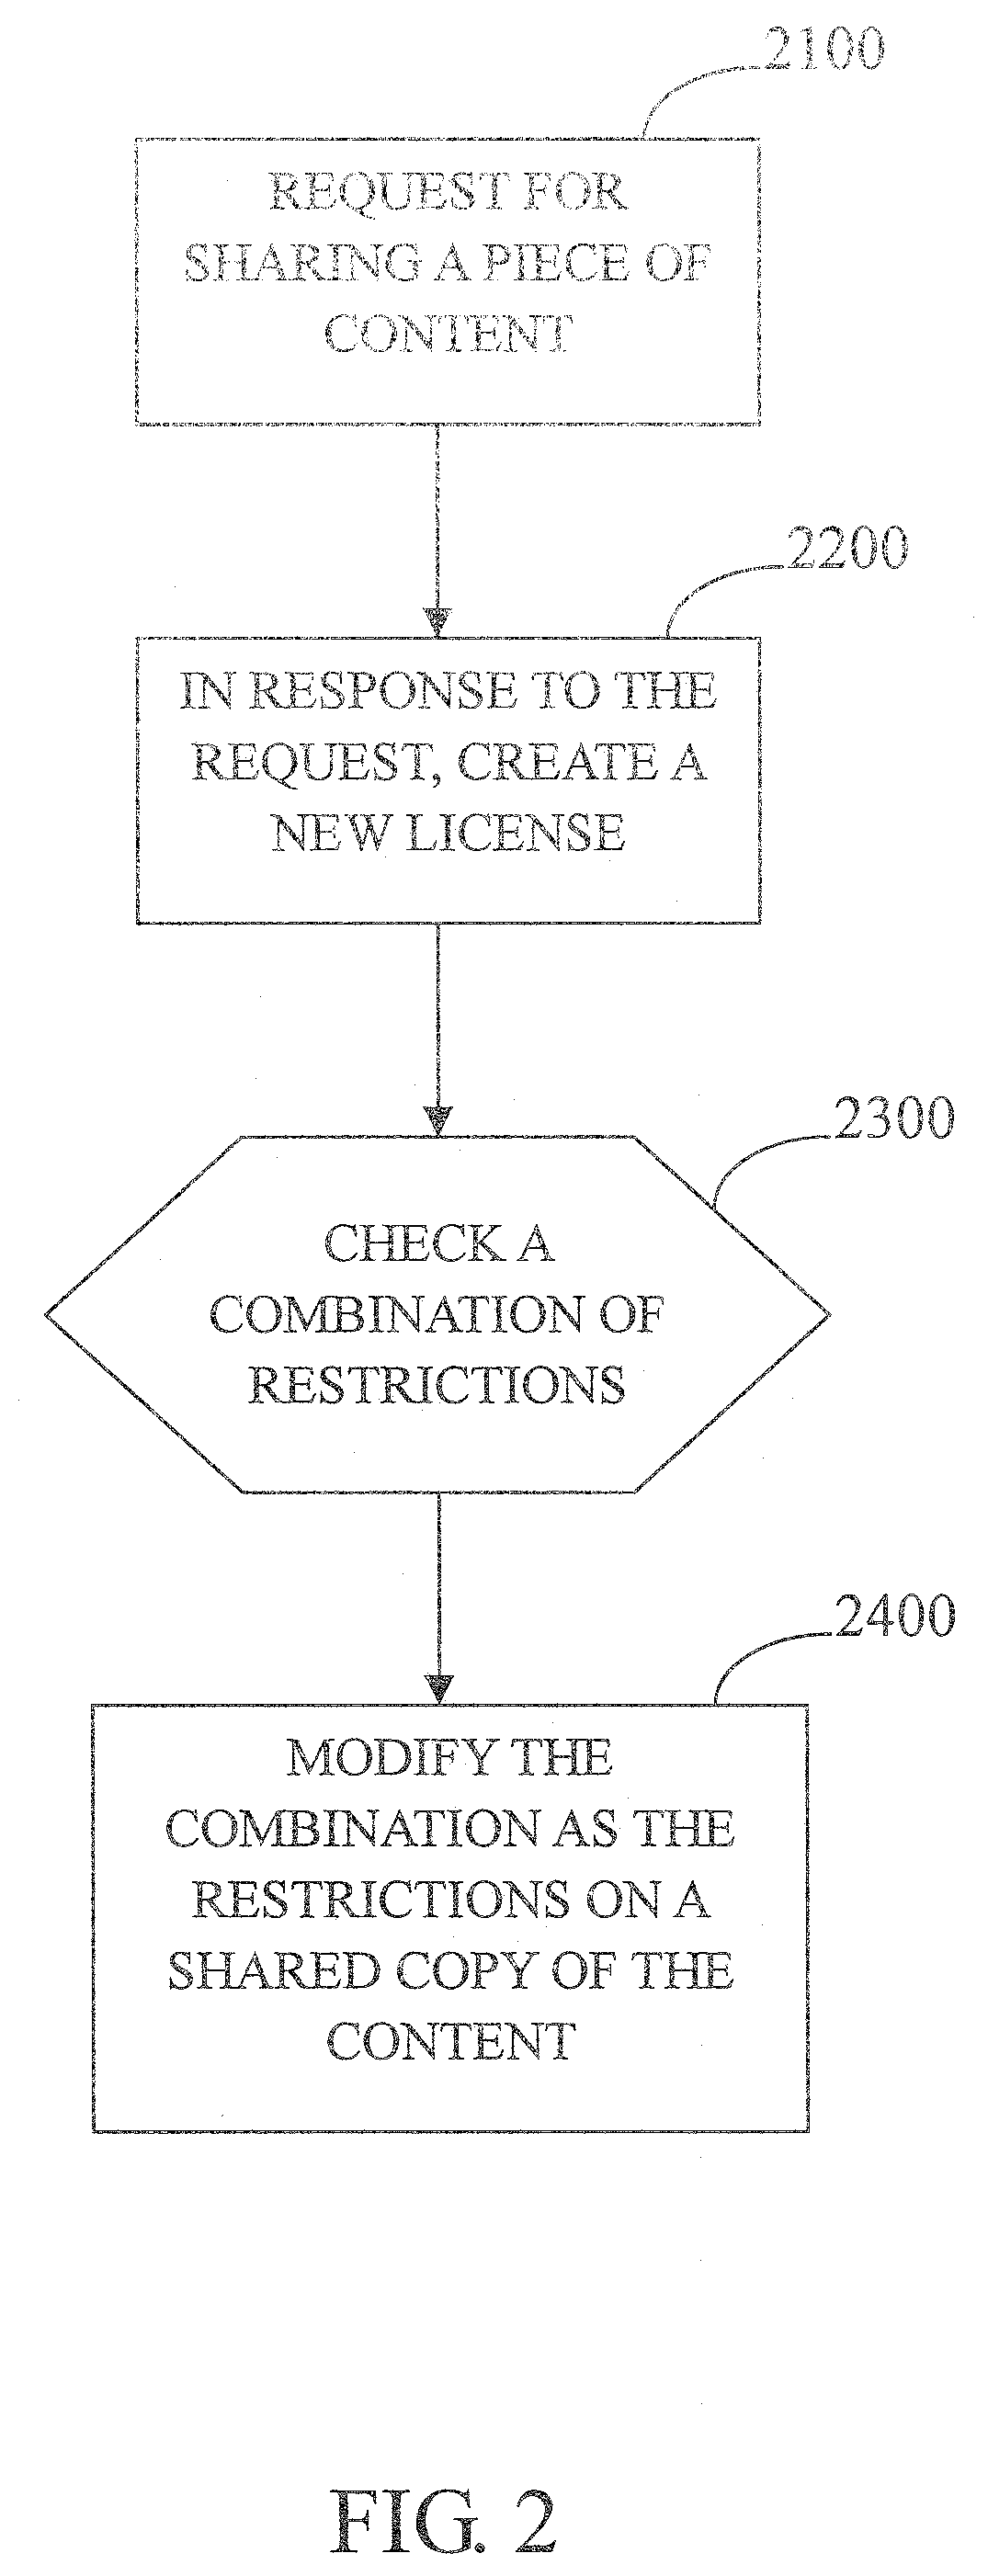 Content protection system and method for enabling secure sharing of copy-protected content